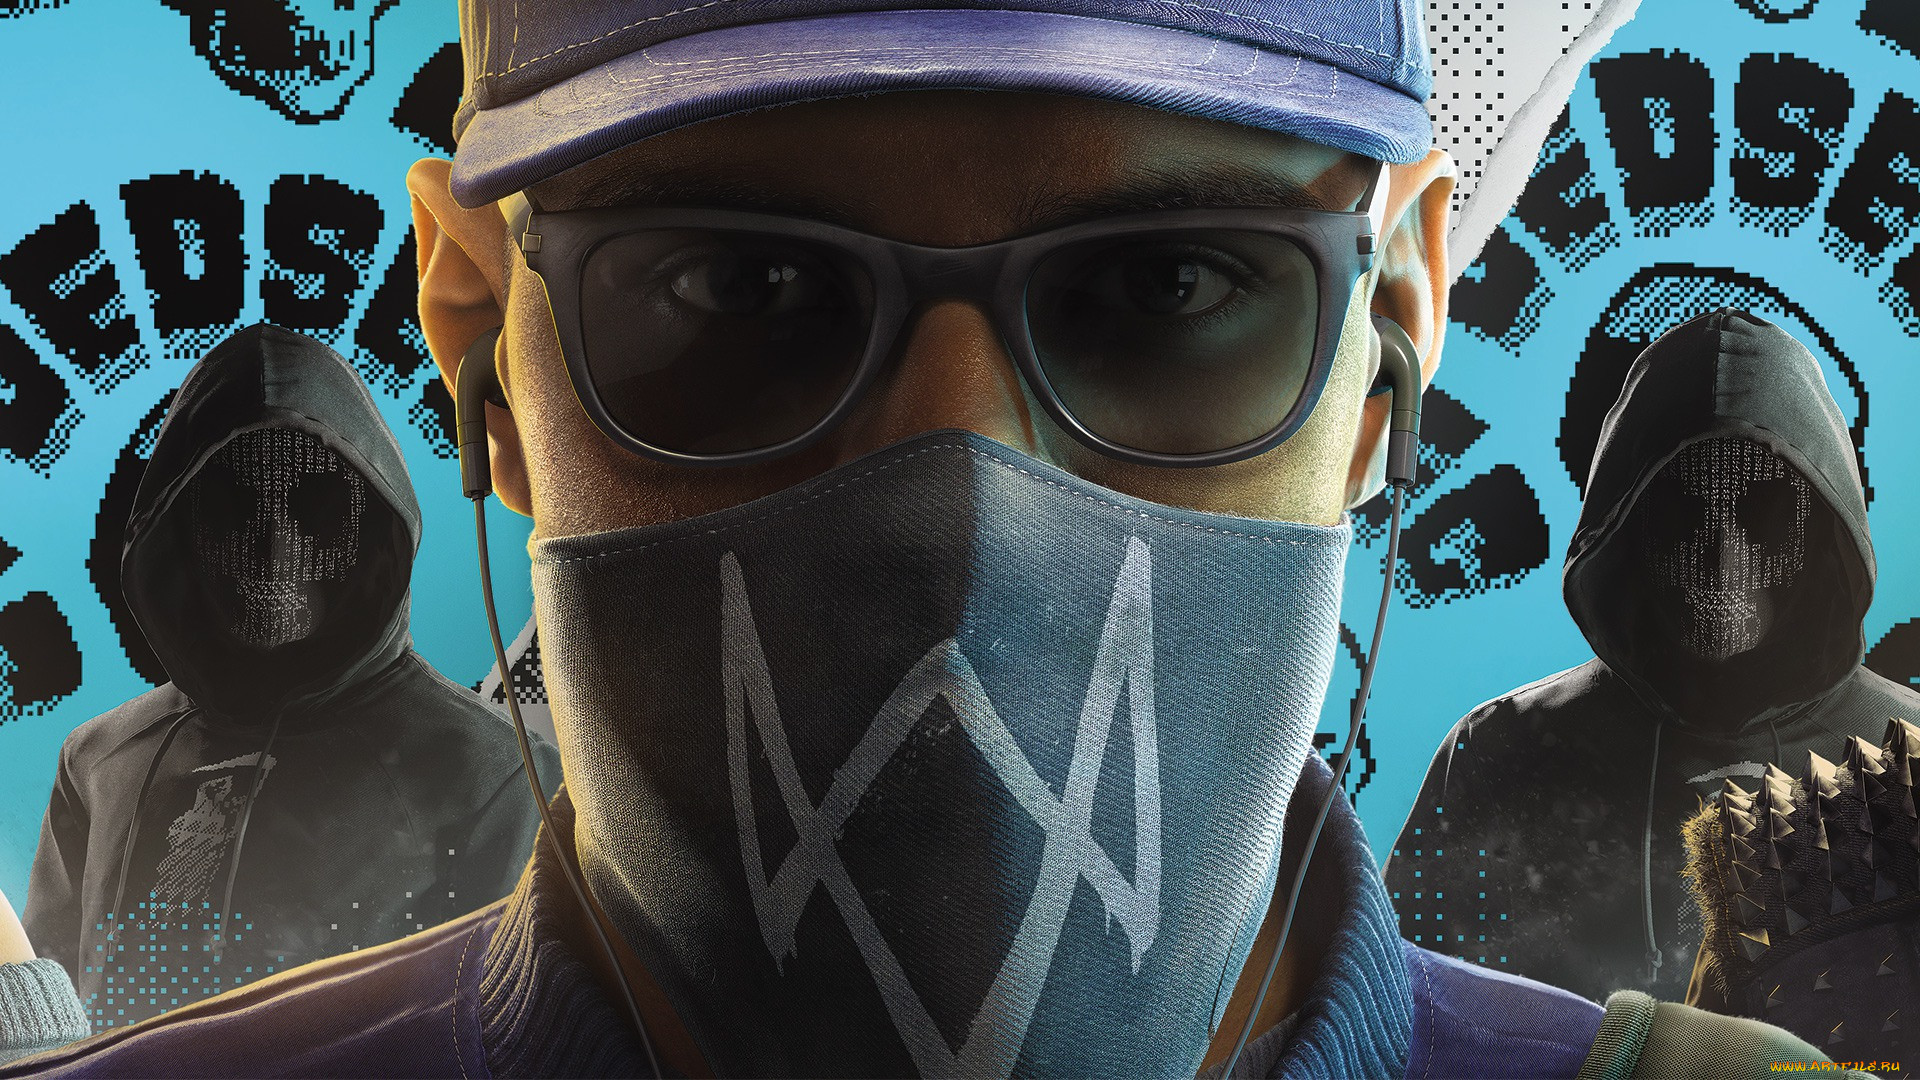  , watch dogs 2, 